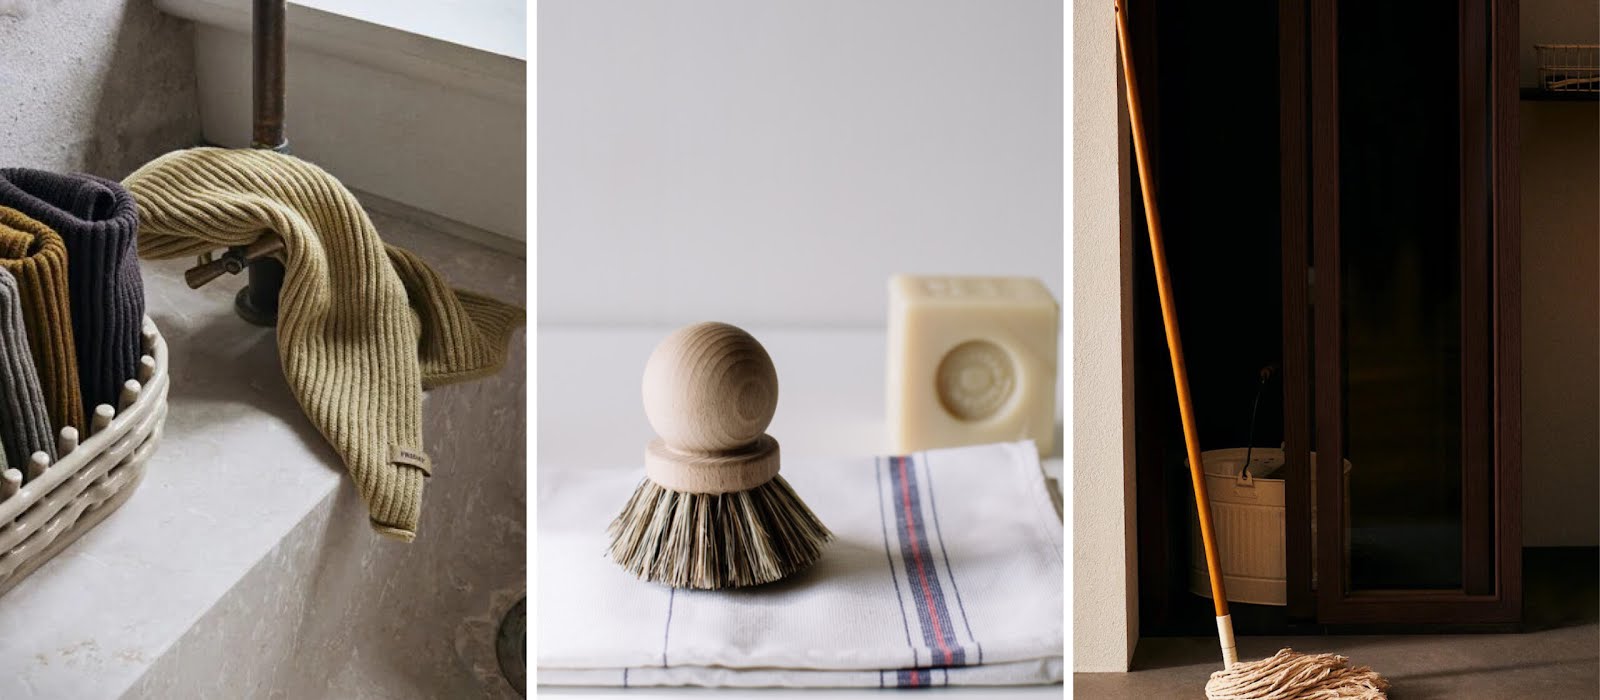 Make cleaning feel less of a chore with these beautiful brushes, cloths and soaps